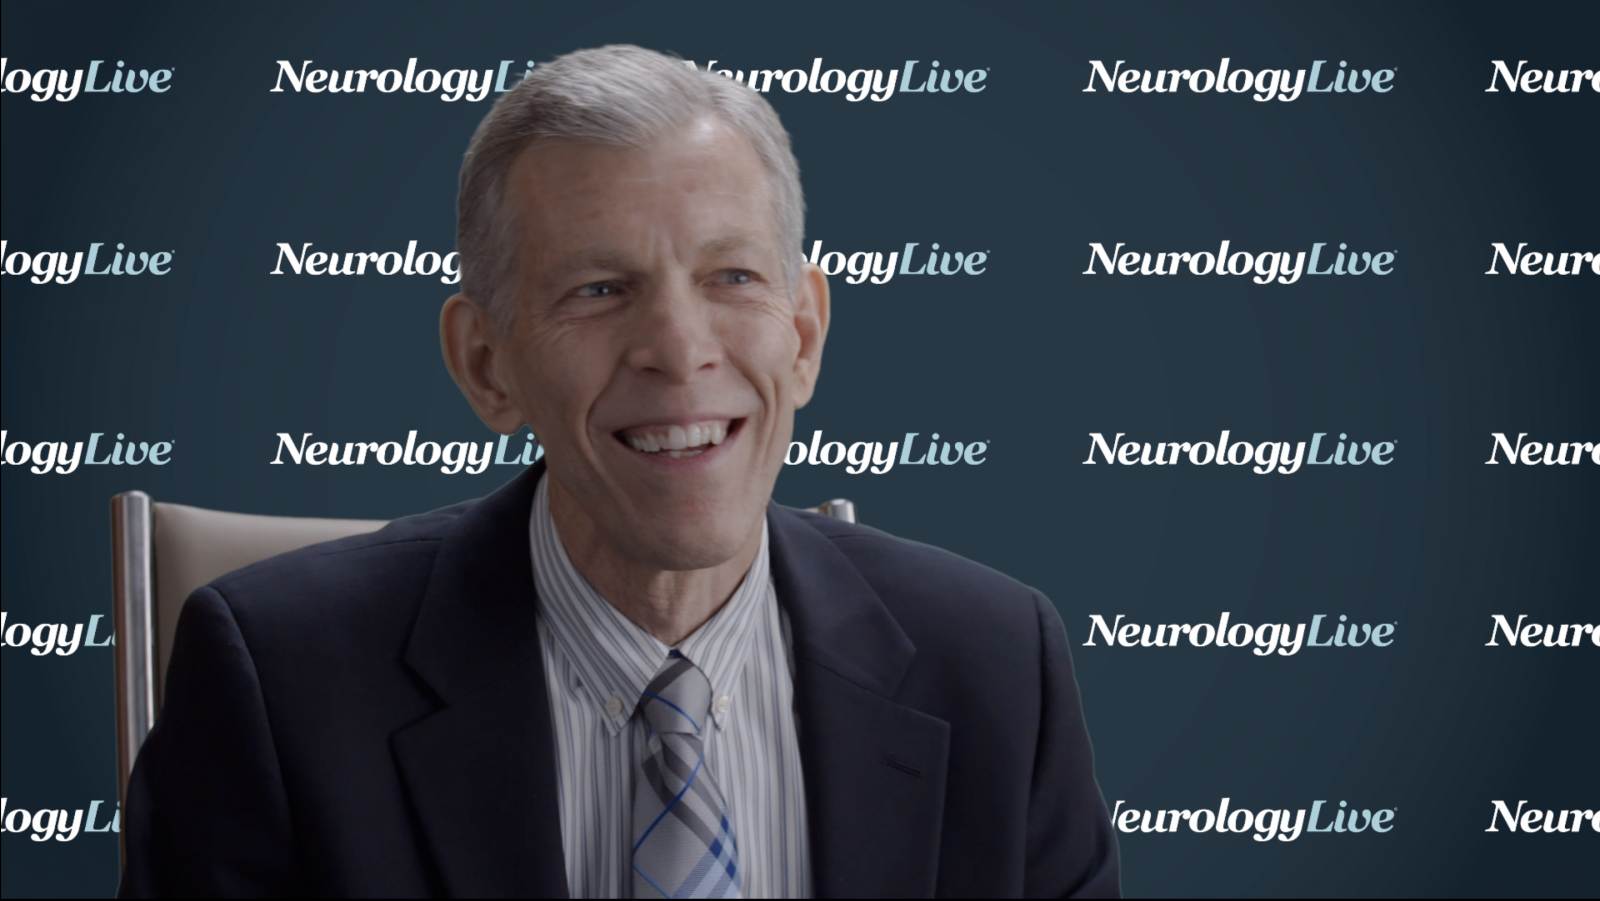 James W. Wheless, MD: Making Treatment Decisions in Epilepsy